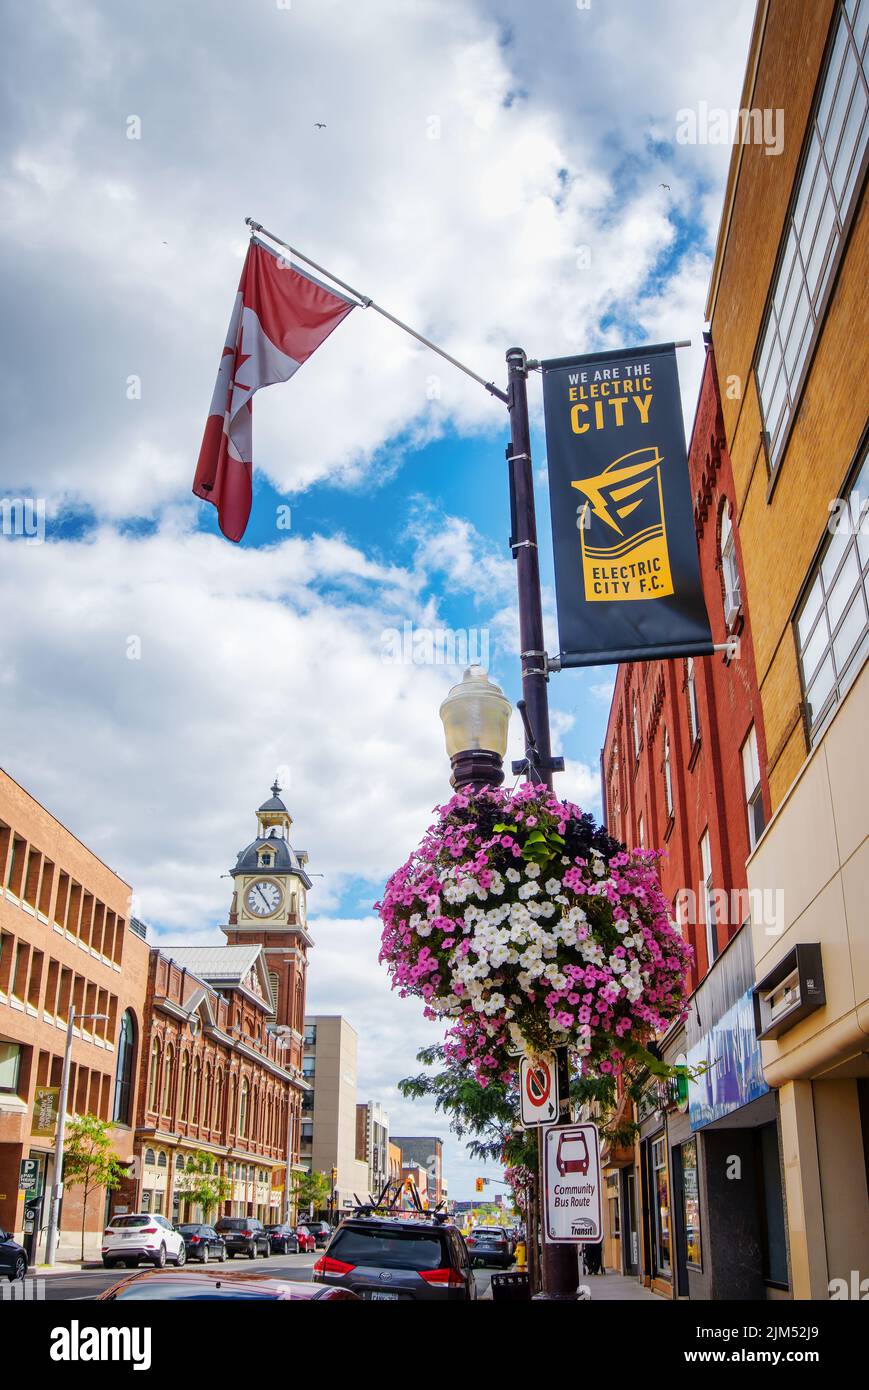 Peterborough Square building, a heritage architecture built in 1889, in downtown with Canadian flag and The Electric City F.C. banner in foreground. T Stock Photo